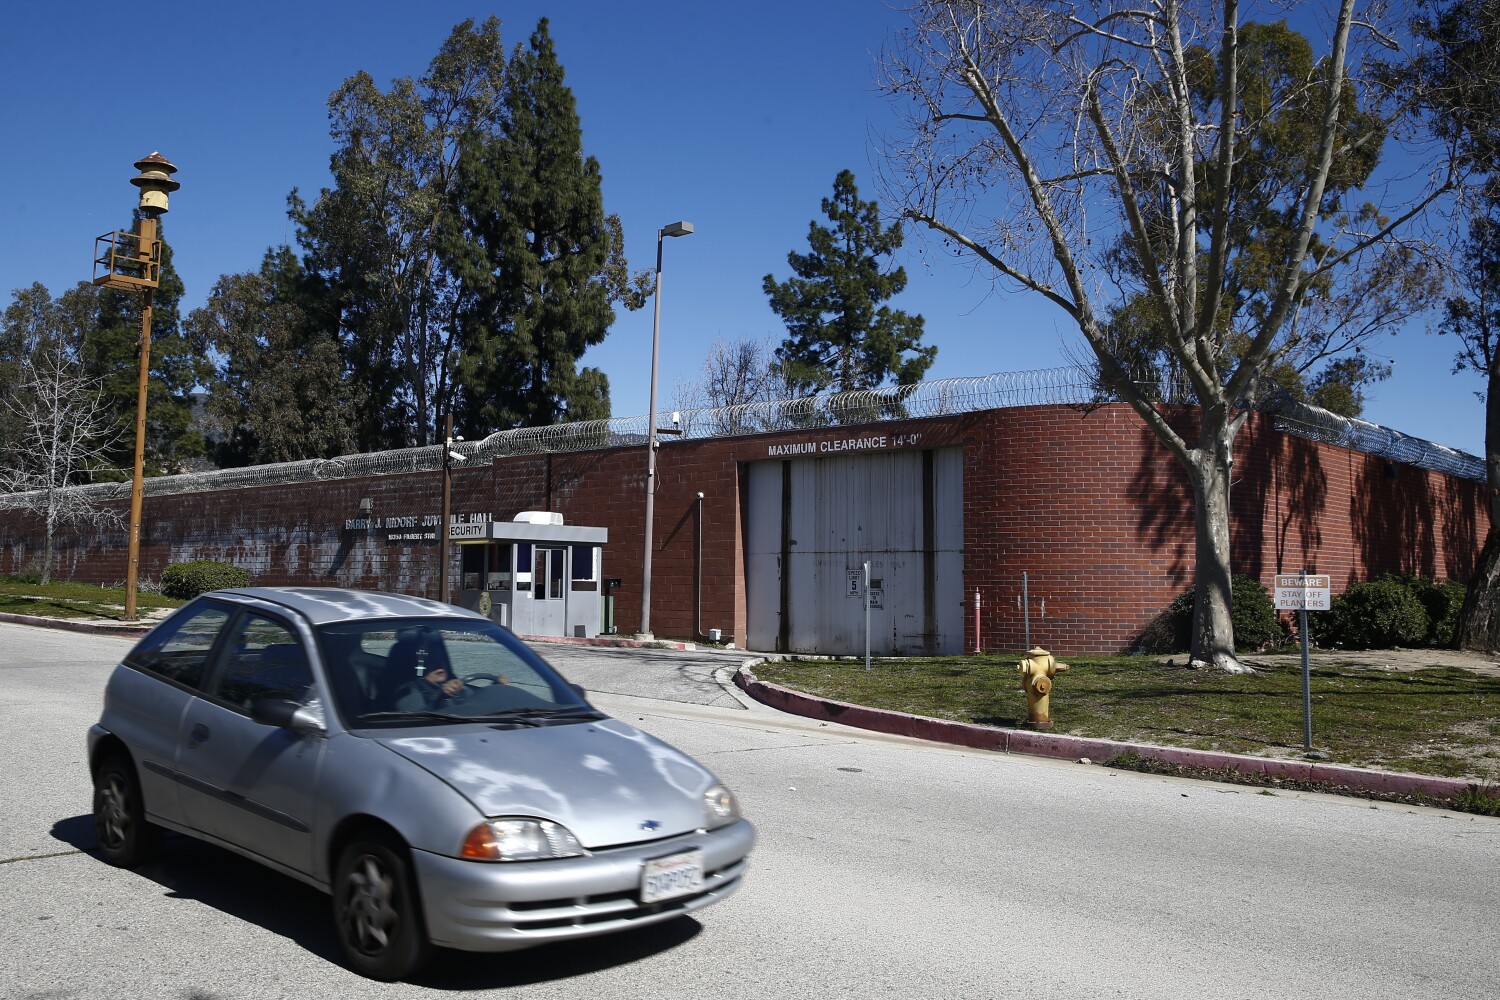 Another L.A. juvenile hall fails inspection weeks after Central Juvenile Hall evacuation 